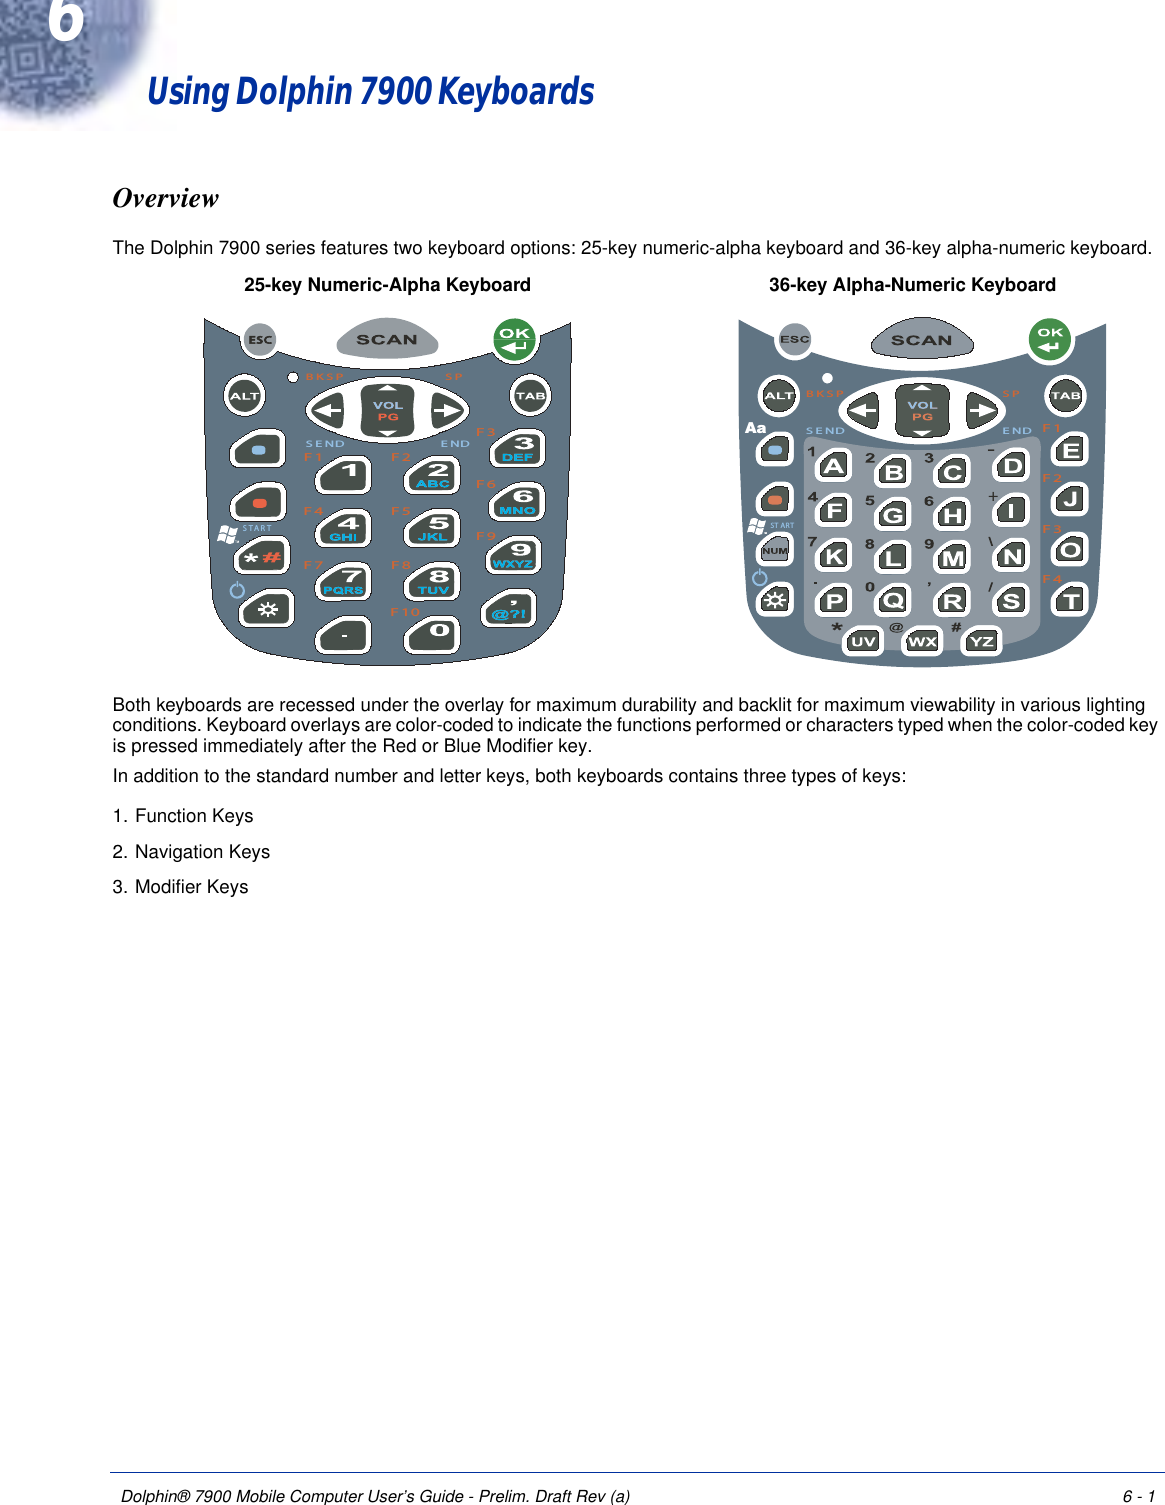 Dolphin® 7900 Mobile Computer User’s Guide - Prelim. Draft Rev (a) 6 - 16Using Dolphin 7900 KeyboardsOverviewThe Dolphin 7900 series features two keyboard options: 25-key numeric-alpha keyboard and 36-key alpha-numeric keyboard. Both keyboards are recessed under the overlay for maximum durability and backlit for maximum viewability in various lighting conditions. Keyboard overlays are color-coded to indicate the functions performed or characters typed when the color-coded key is pressed immediately after the Red or Blue Modifier key. In addition to the standard number and letter keys, both keyboards contains three types of keys:1. Function Keys2. Navigation Keys 3. Modifier KeysF1F2F3F4 F5F6F7 F8F9F10STARTBKSP SPSEND ENDESCST ARTAa+-BKSP SPSEND ENDF1F2F3F425-key Numeric-Alpha Keyboard 36-key Alpha-Numeric Keyboard